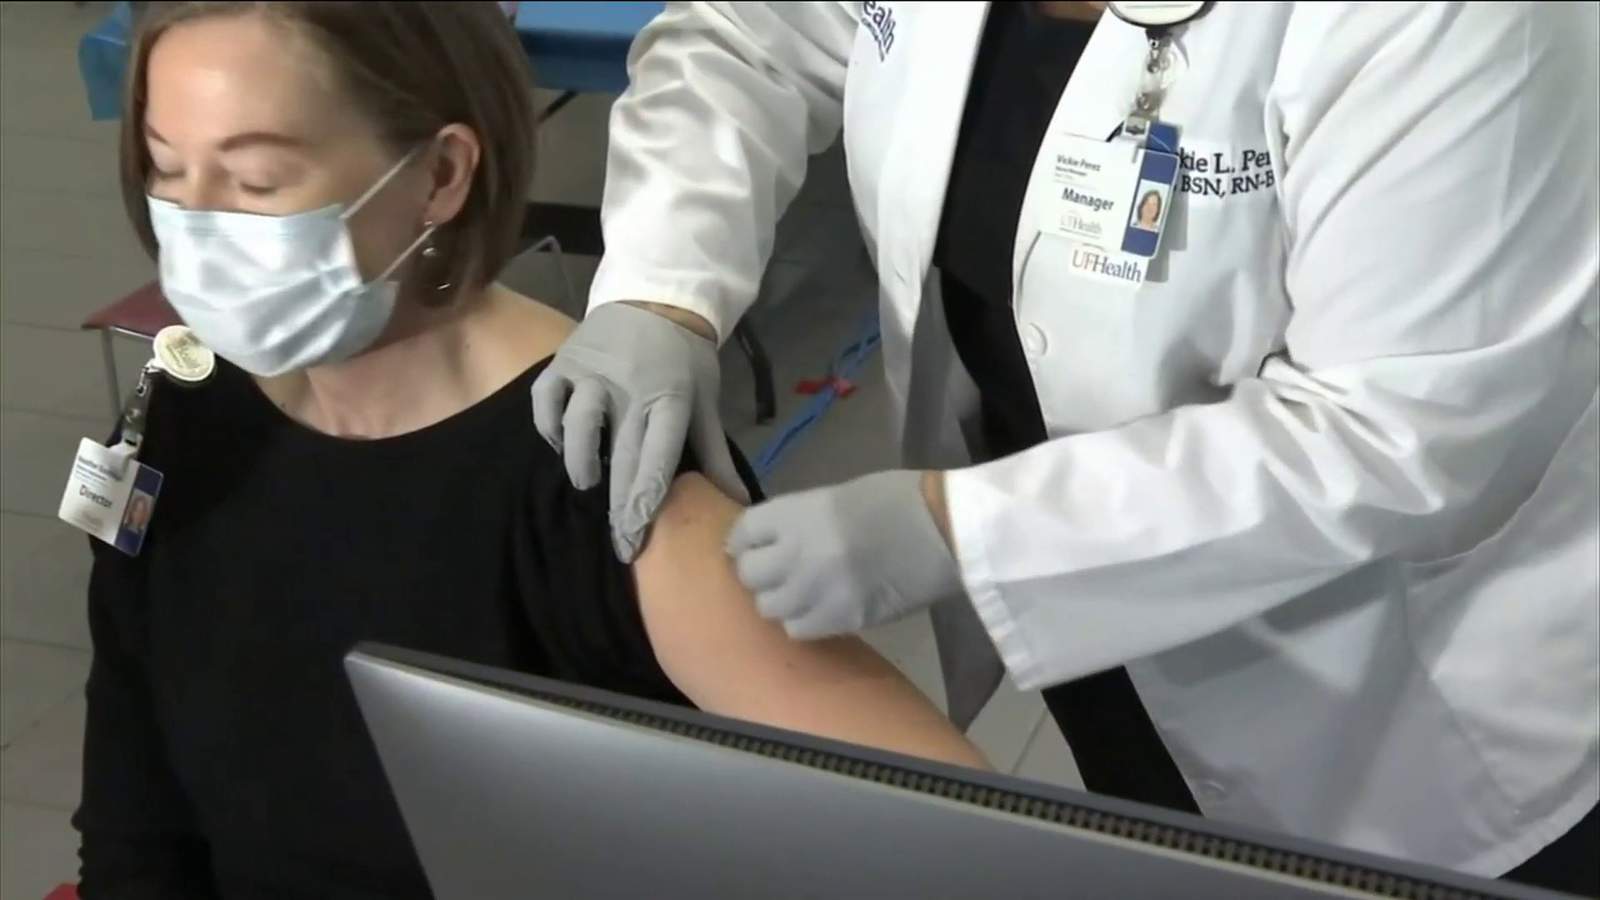 Moderna vaccine headed for 24 local hospitals, Gov. aims for Feb. 2021 for state’s general population